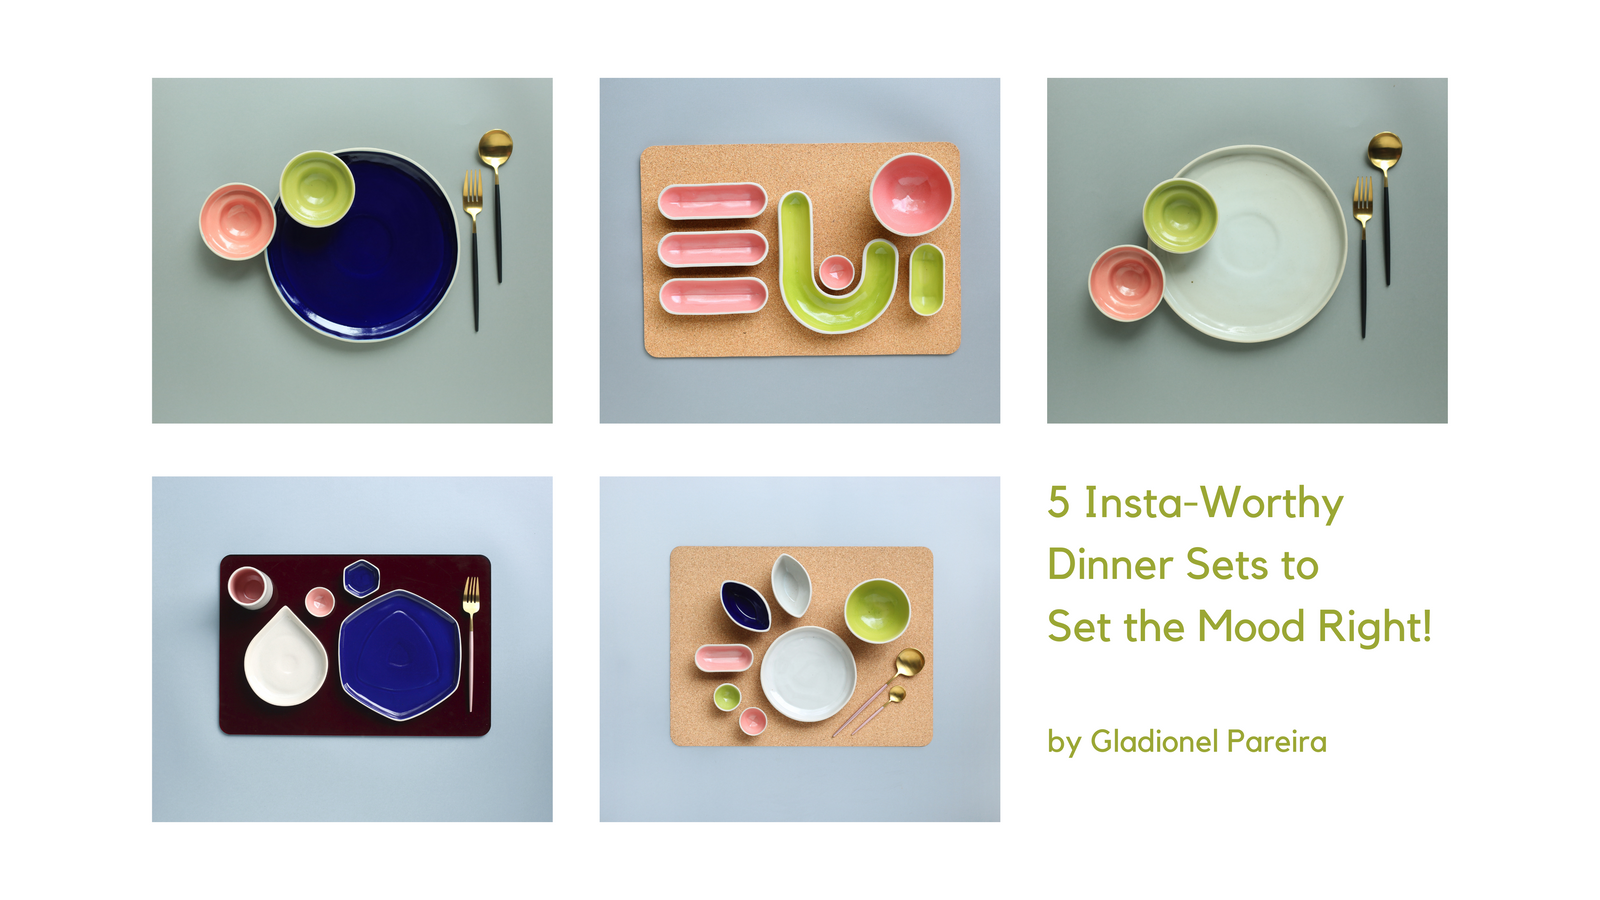 5 Insta-Worthy Dinner Sets to Set the Mood Right!